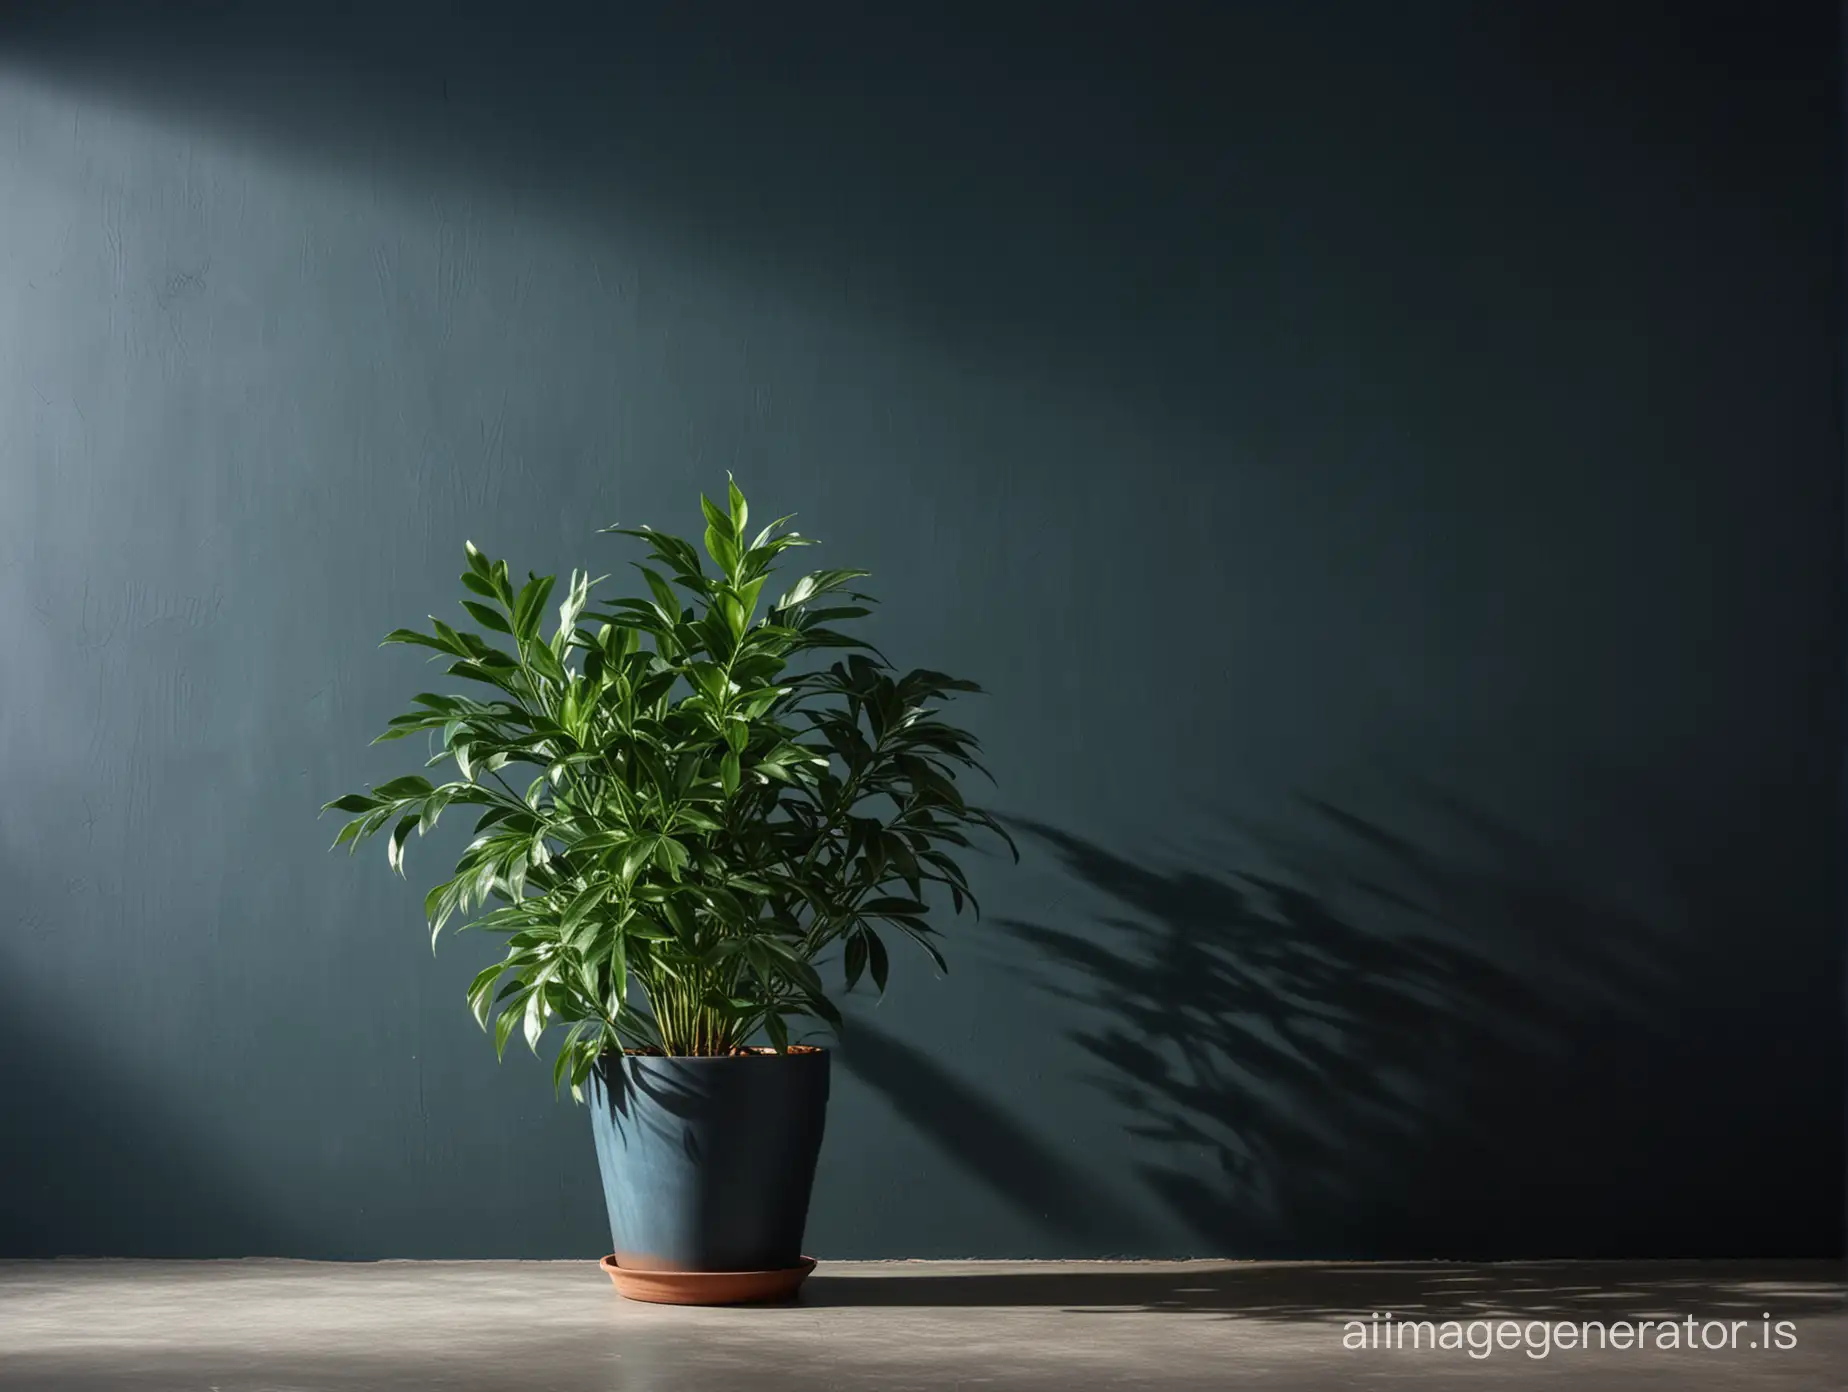 Dark-Blue-Wall-with-Green-Potted-Plant-Casting-Shadow